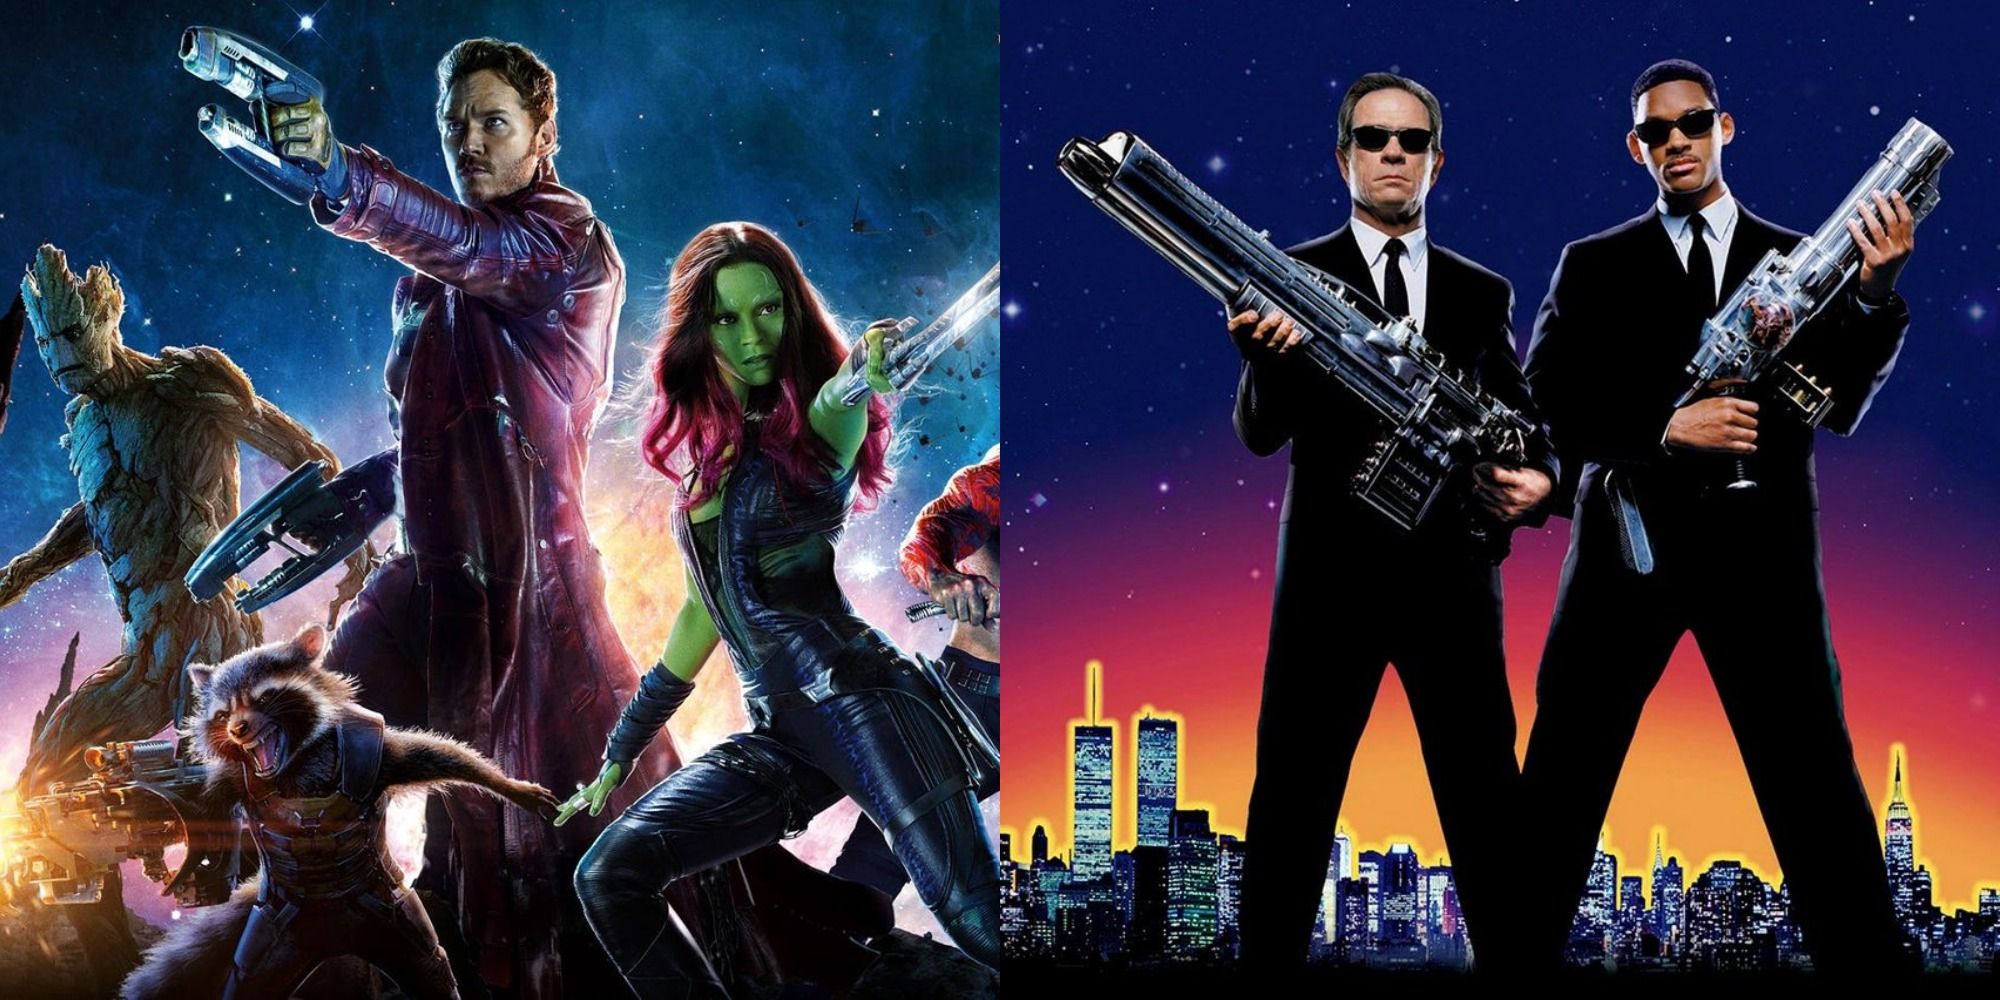 Split image showing the main characters from Guardians of the Galaxy and Men in Black